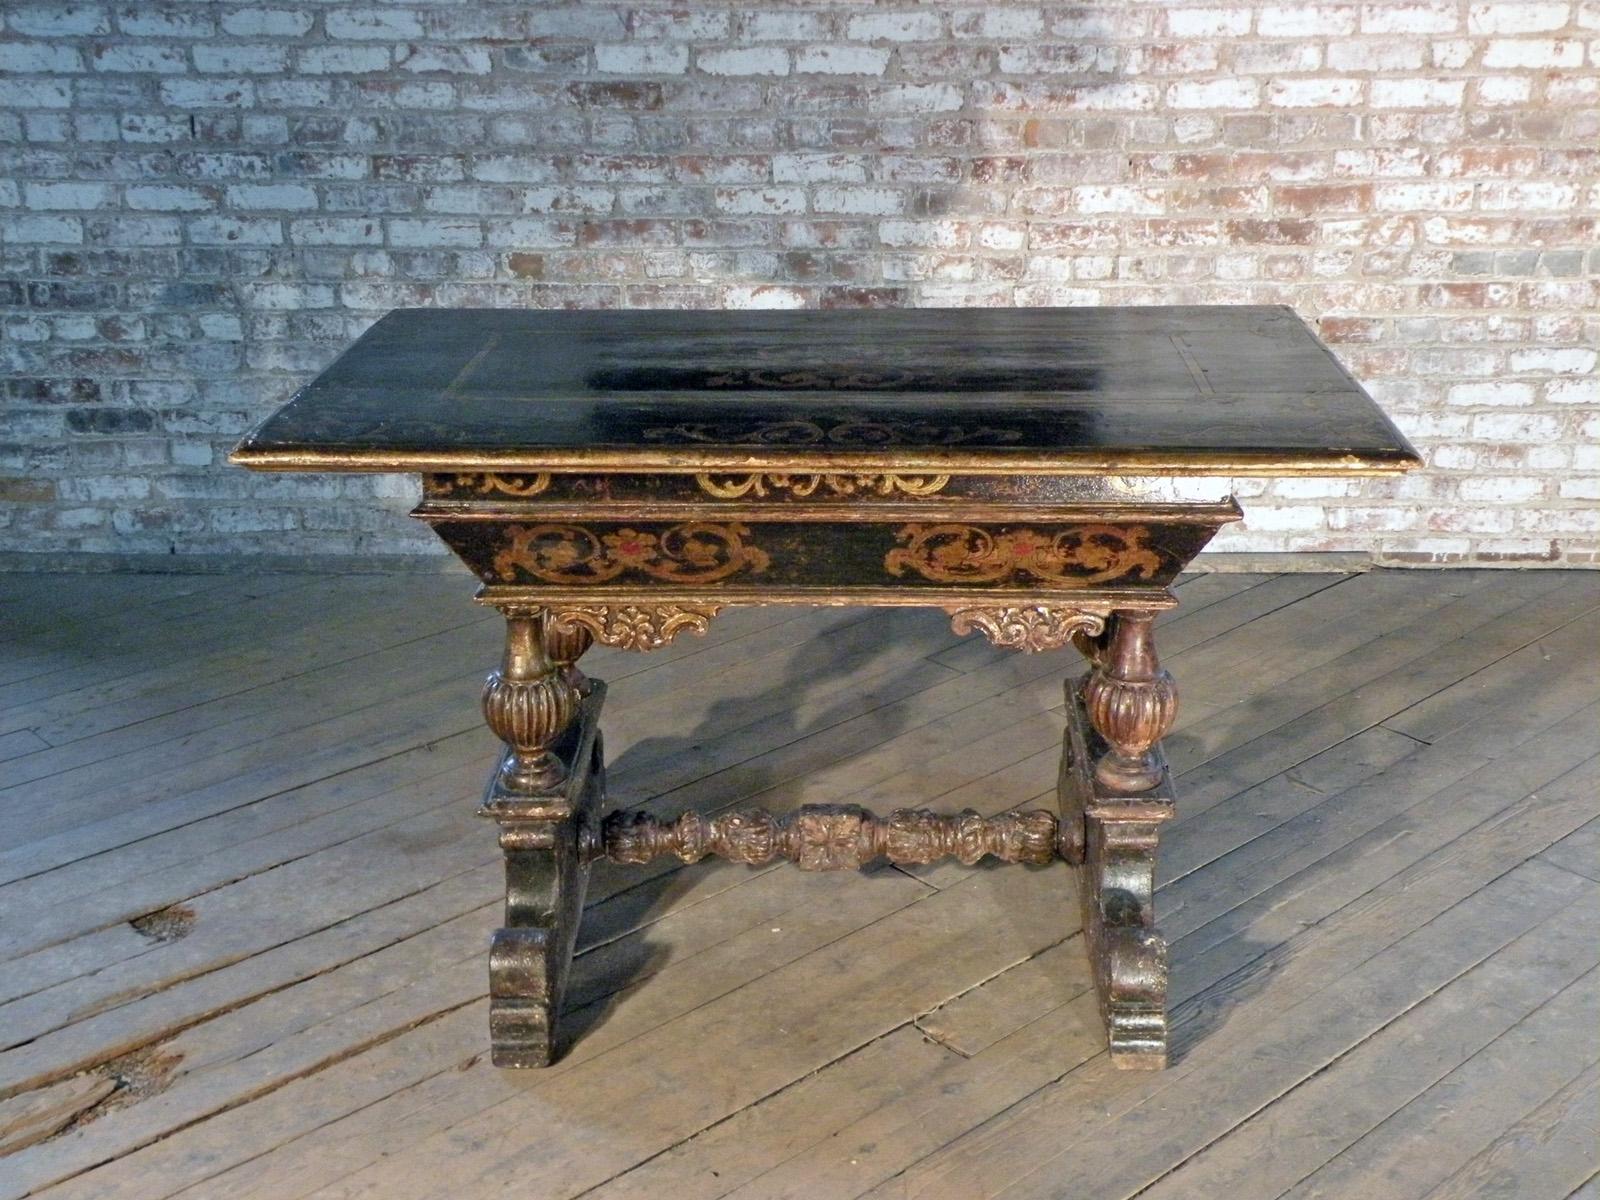 Strikingly decorative Venetian table of highly unusual and rare form, early 17th century.
The oblong molded top enhanced with gilt decoration, above a double frieze with conforming floral ornamentation, supported by carved and gilt double baluster